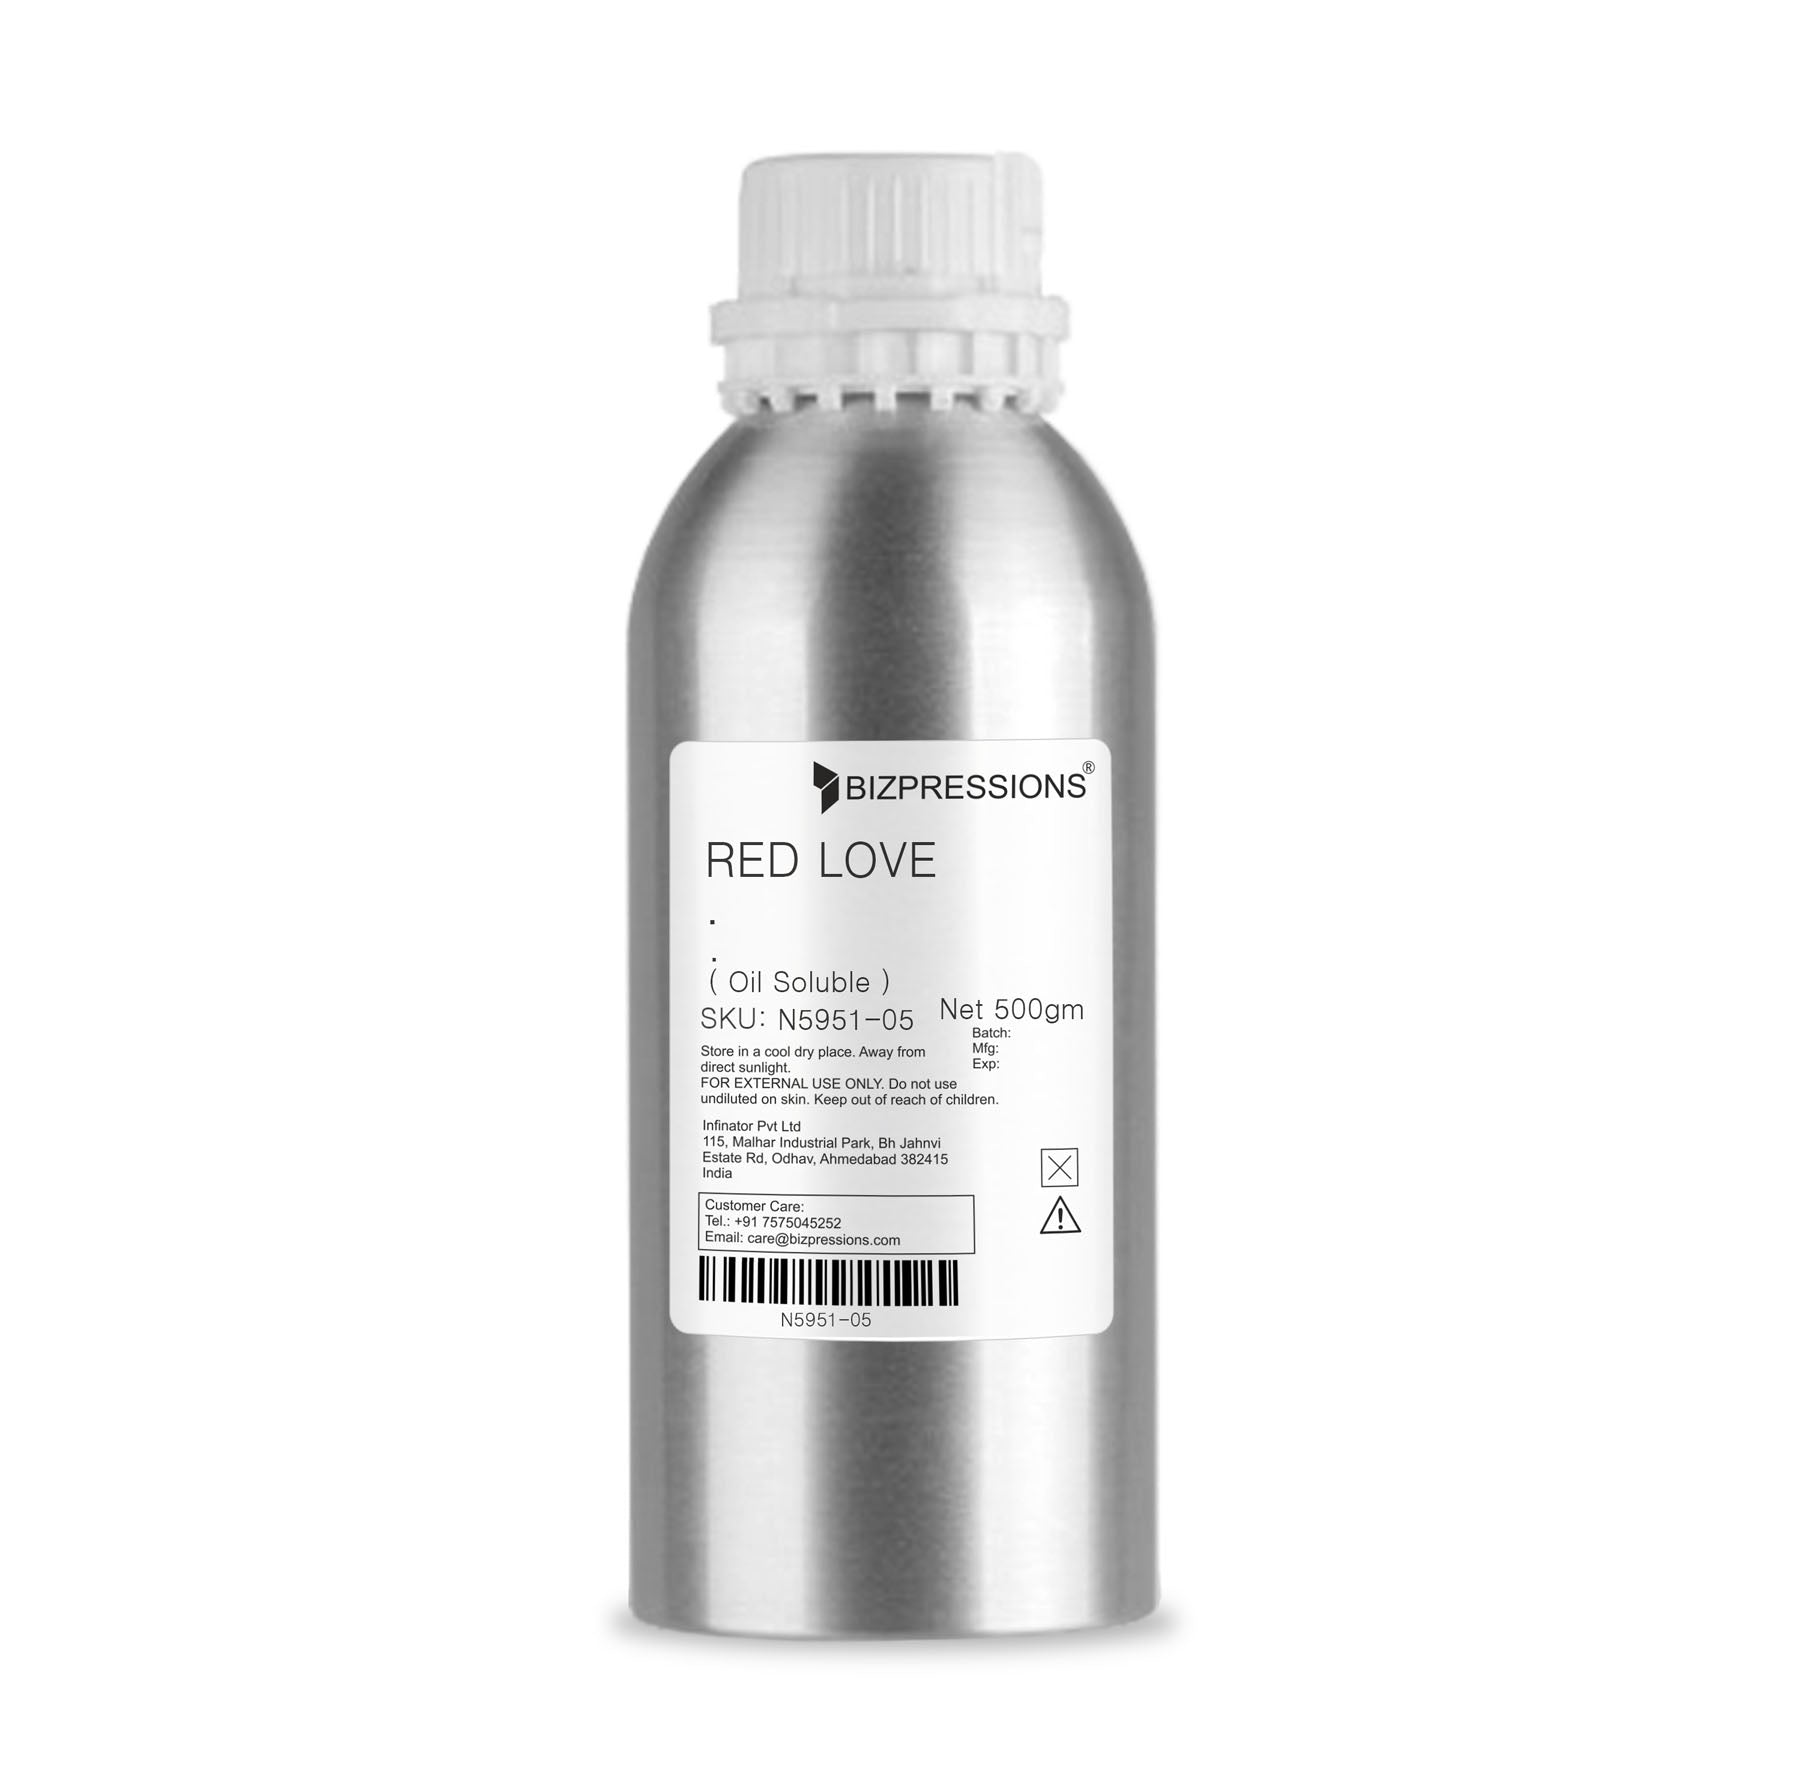 RED LOVE - Fragrance ( Oil Soluble ) - 500 gm